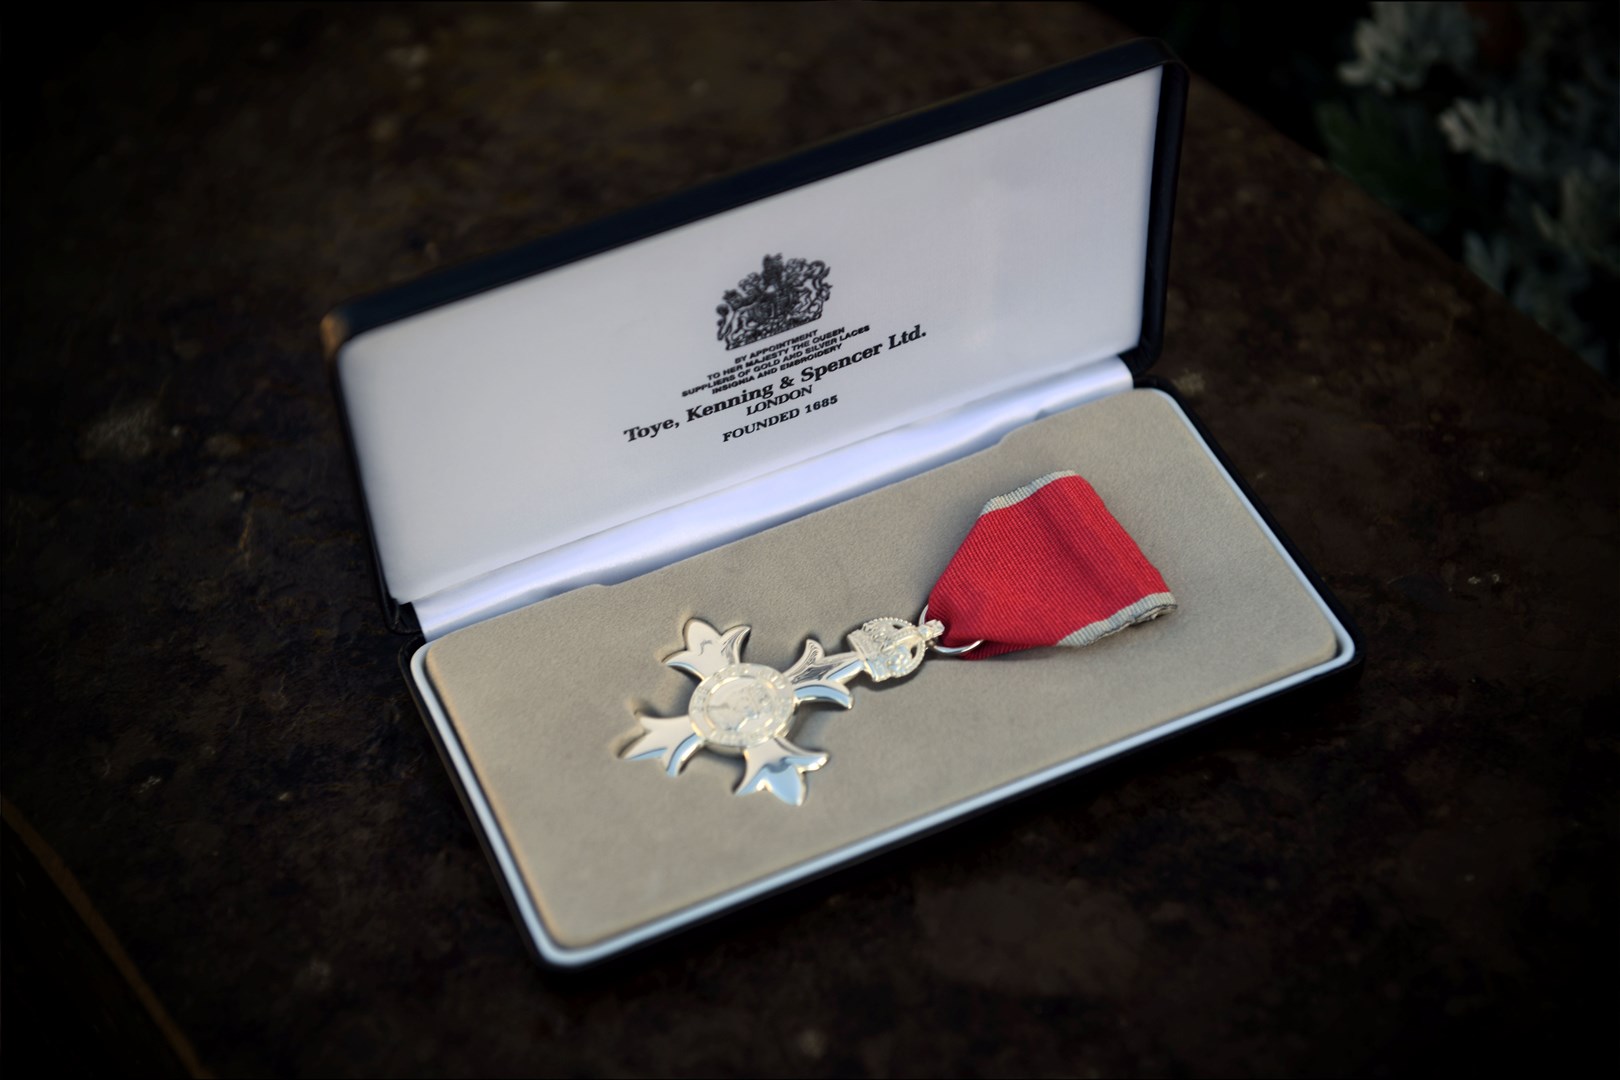 The medal in its presentation box.